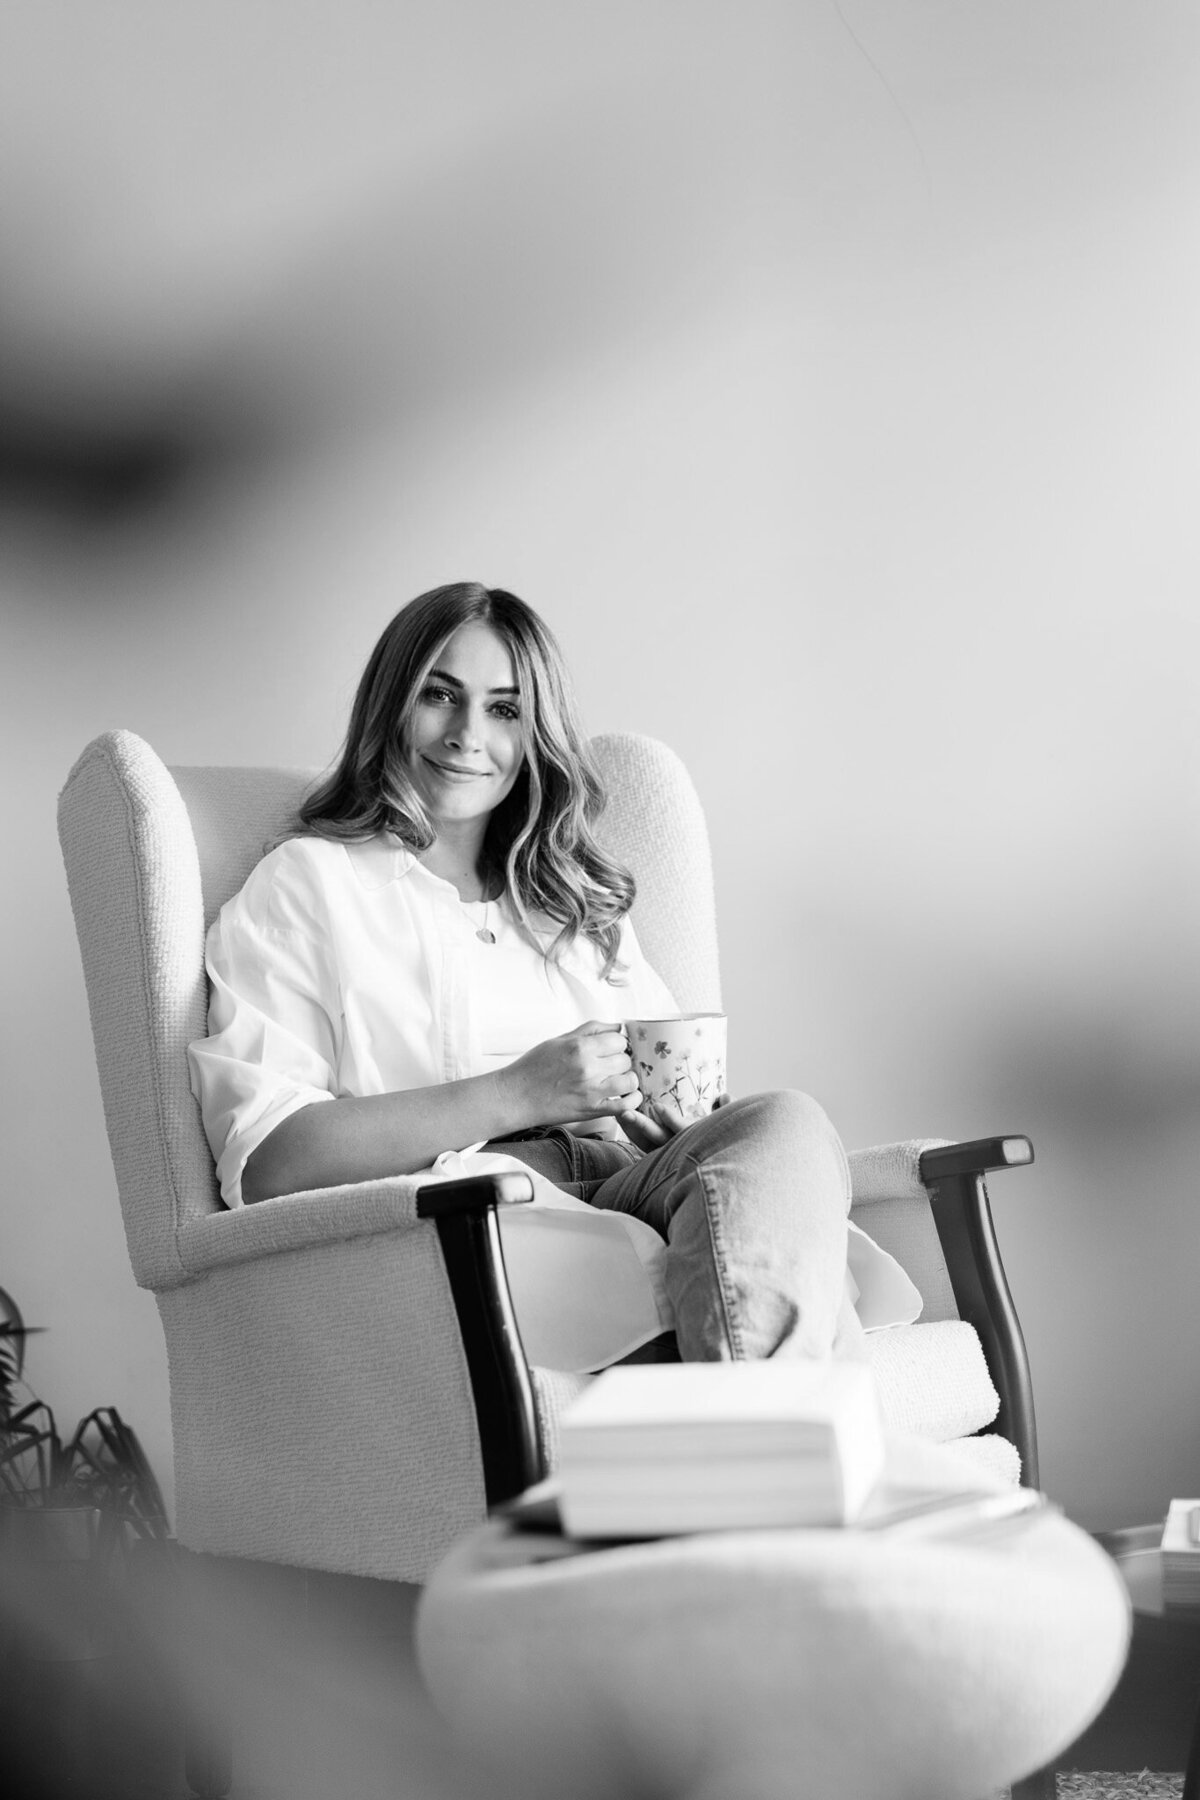 A photo of Steph honey smiling relaxedly sitting in an armchair with a cup in her hand, exuding the confident and approachable vibe essential for 'Is Your Brand Story Resonating? Here's How to Make It Unforgettable' for The Brand Essentials Podcast